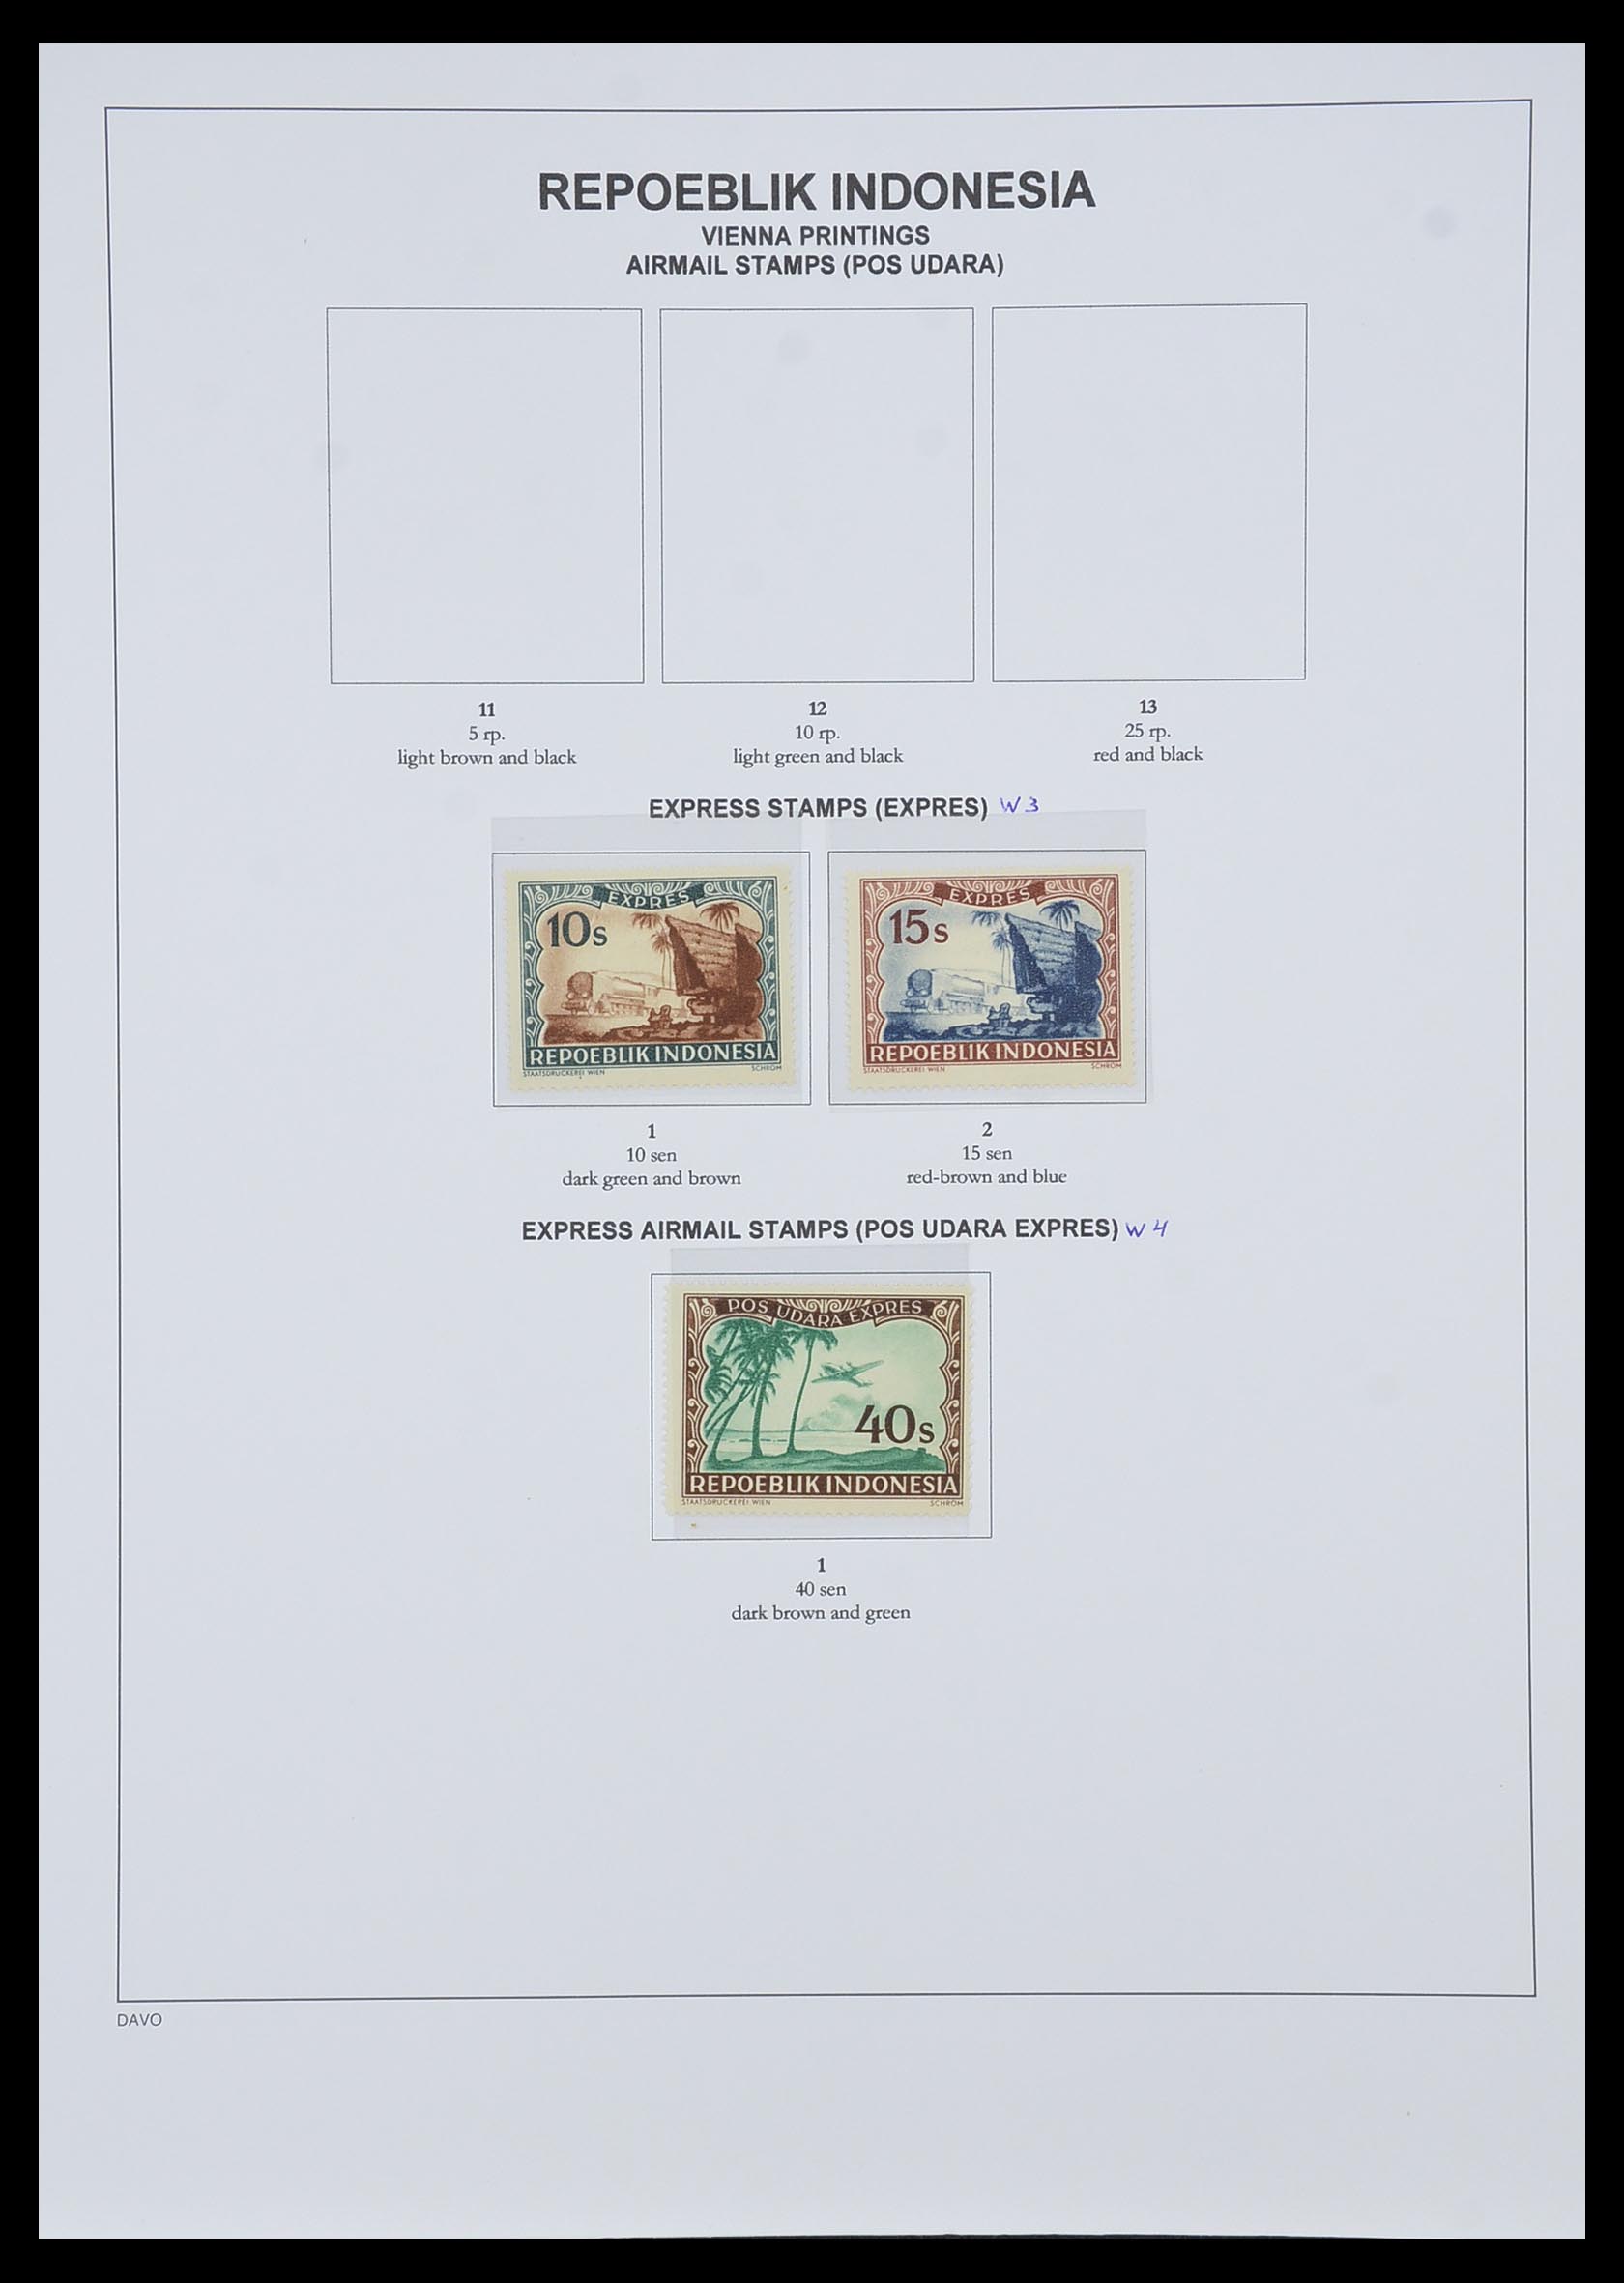 33988 012 - Stamp collection 33988 Vienna printings Indonesia.